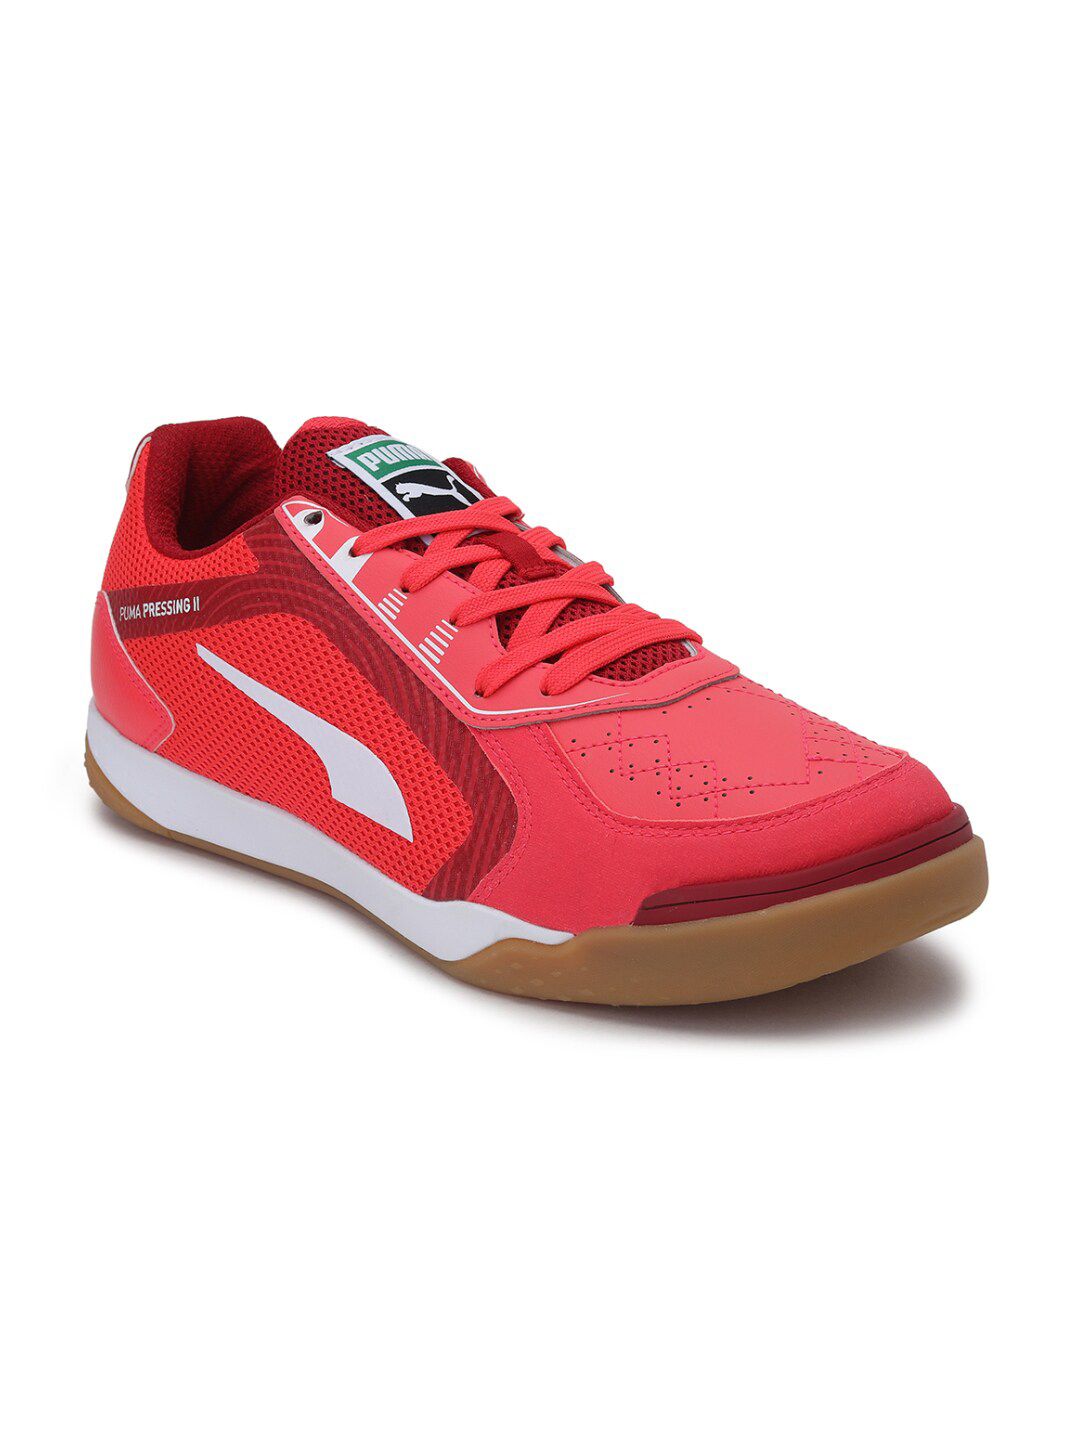 Puma Unisex Pink Mesh Football Non-Marking Shoes Price in India